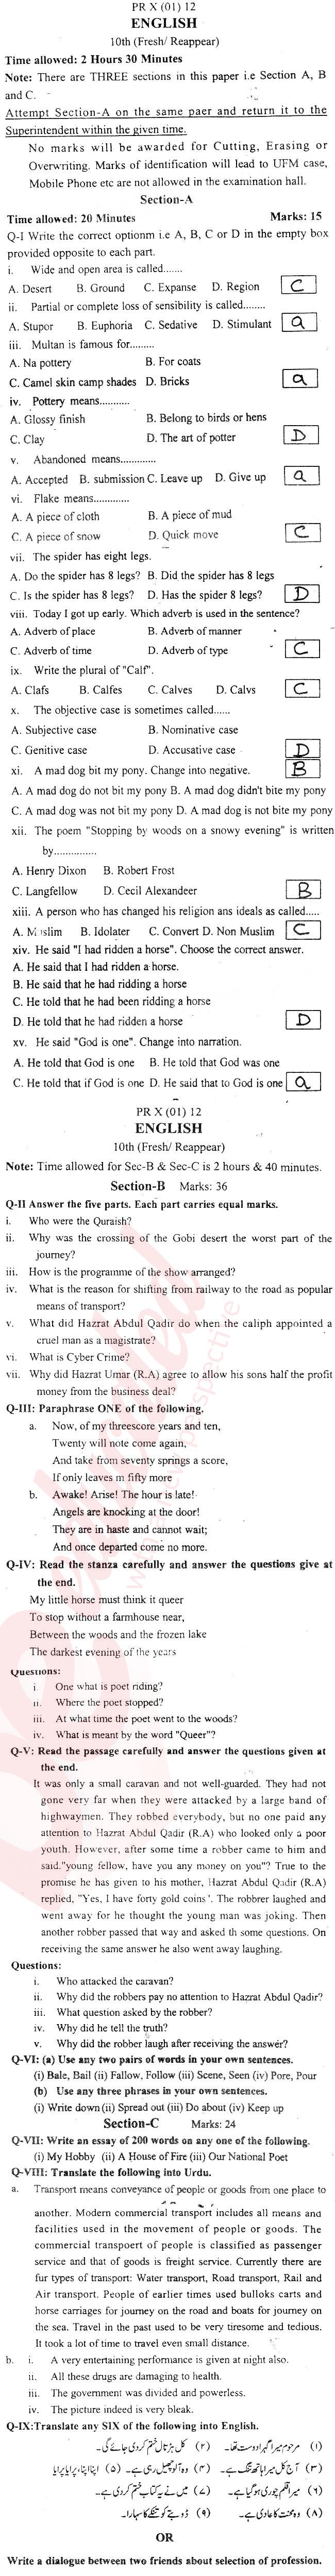 English 10th class Past Paper Group 1 BISE Bannu 2012